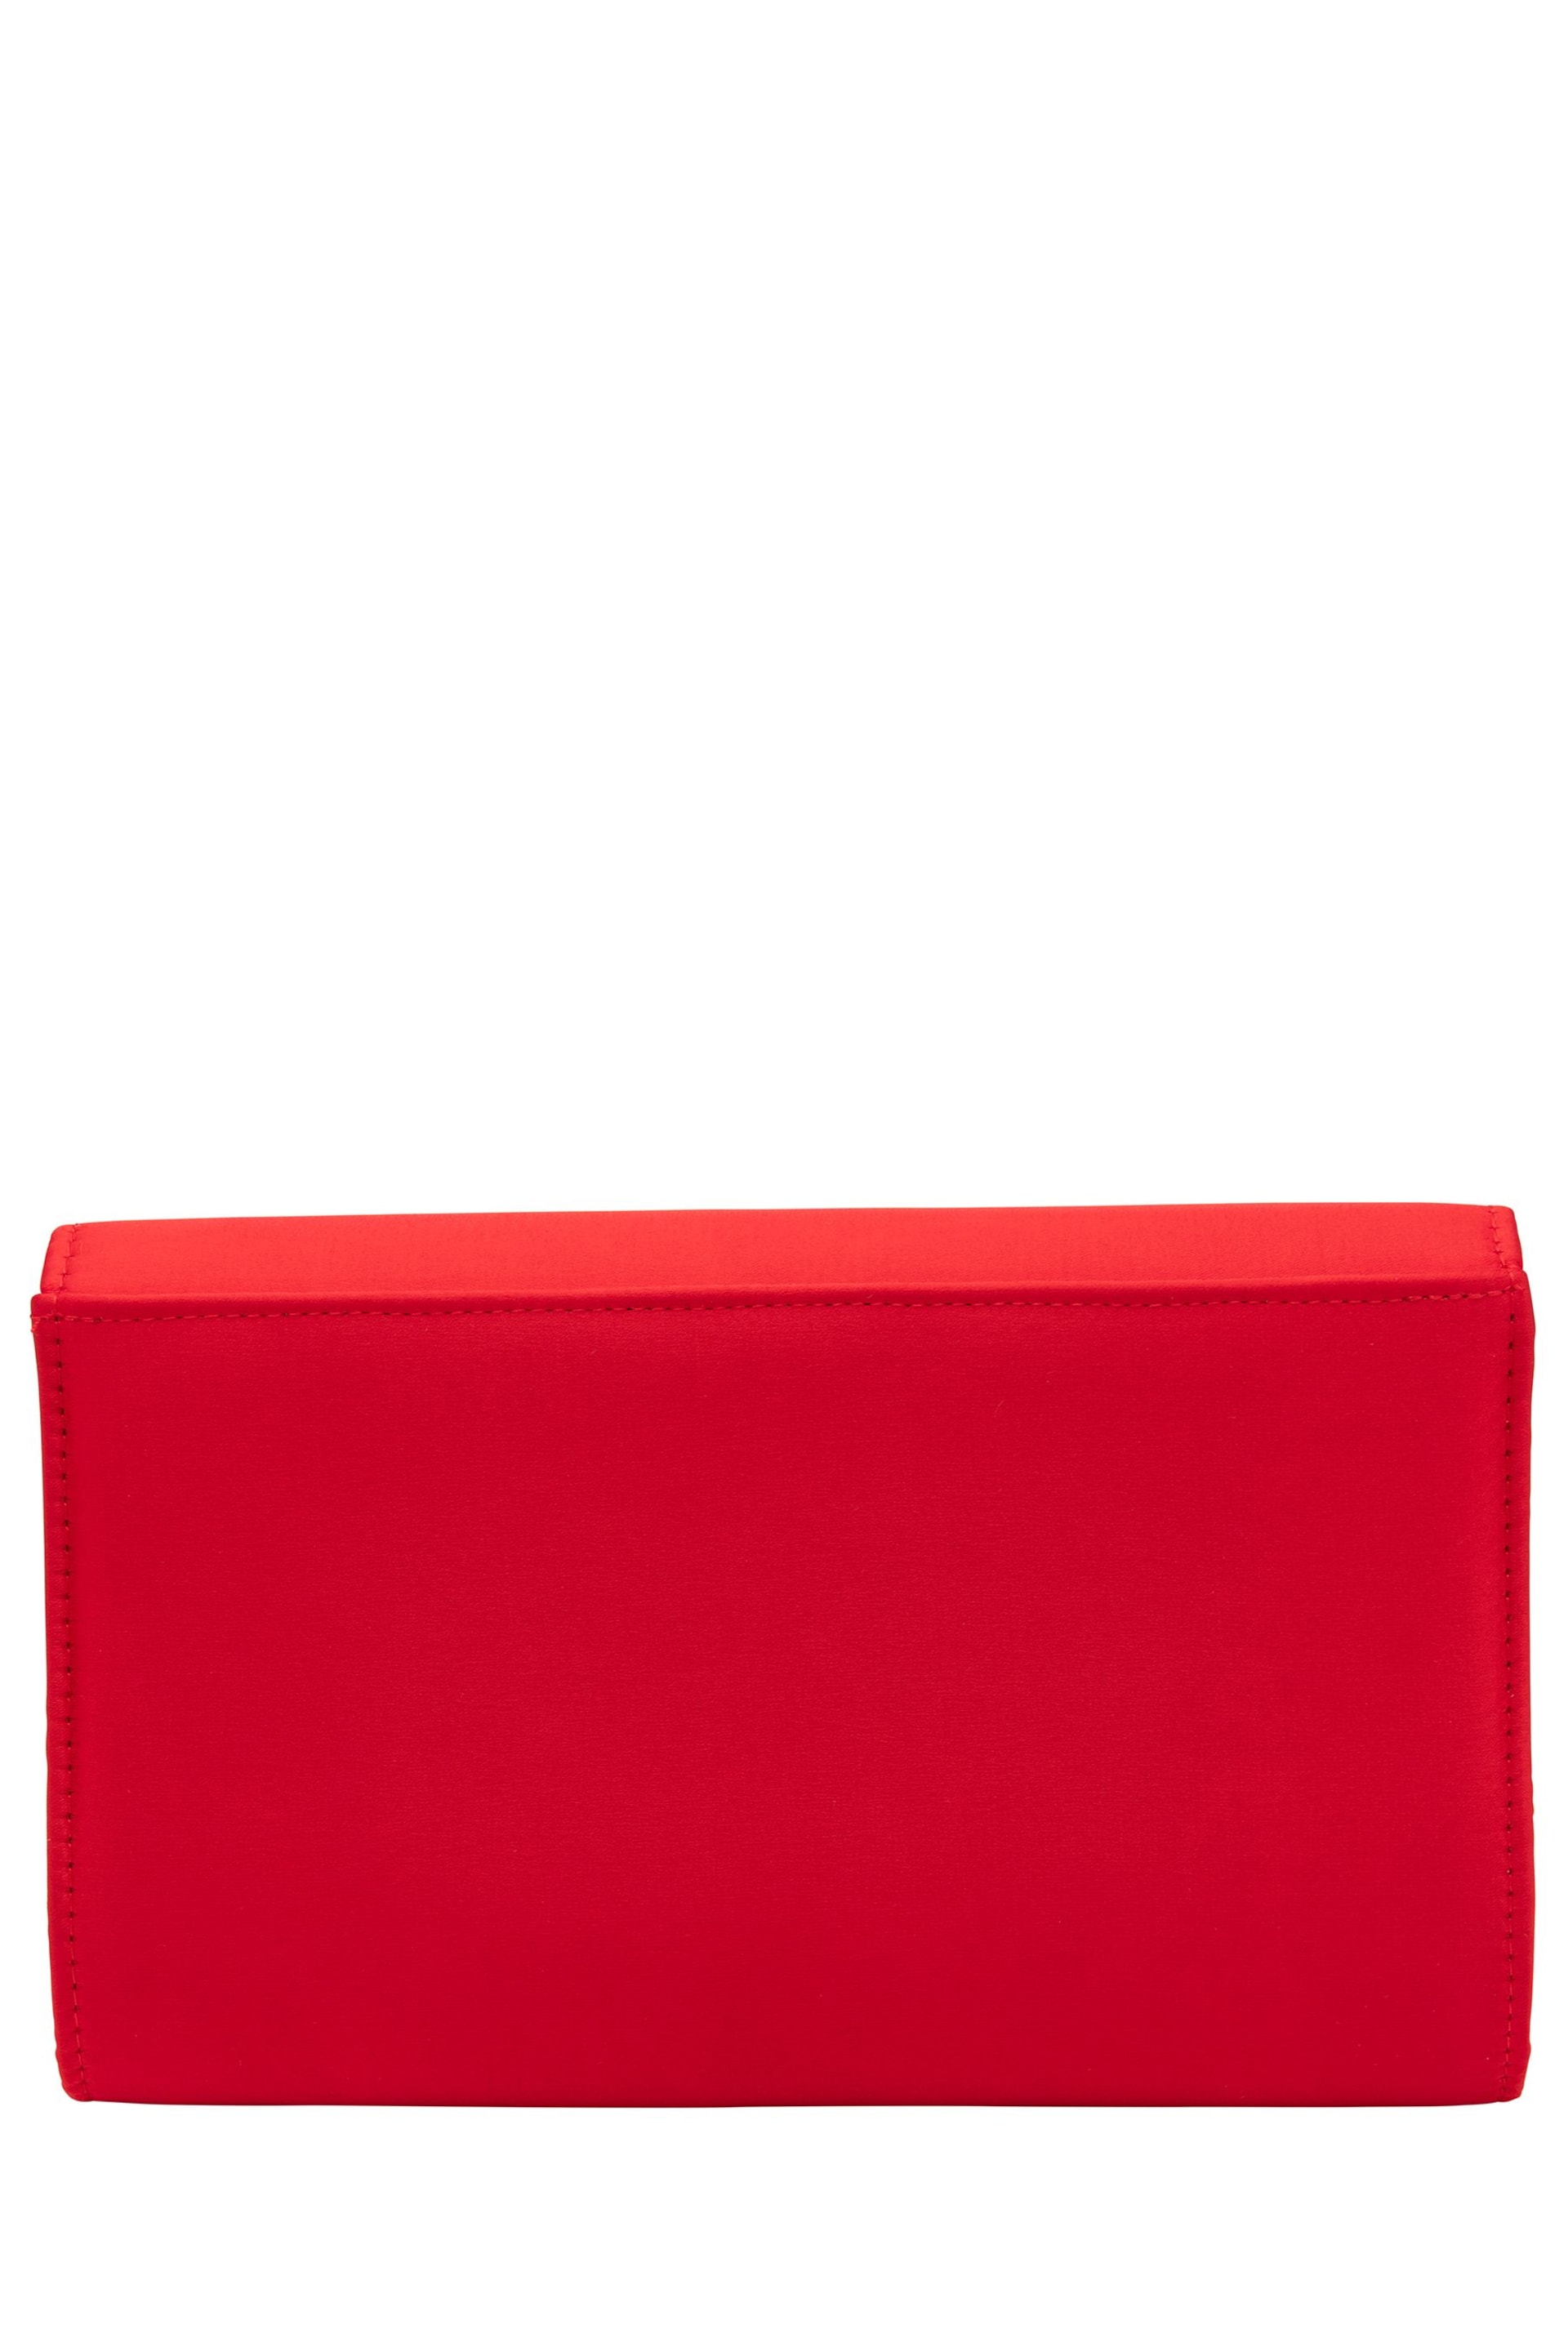 Ravel Red Clutch Bag with Chain - Image 2 of 4